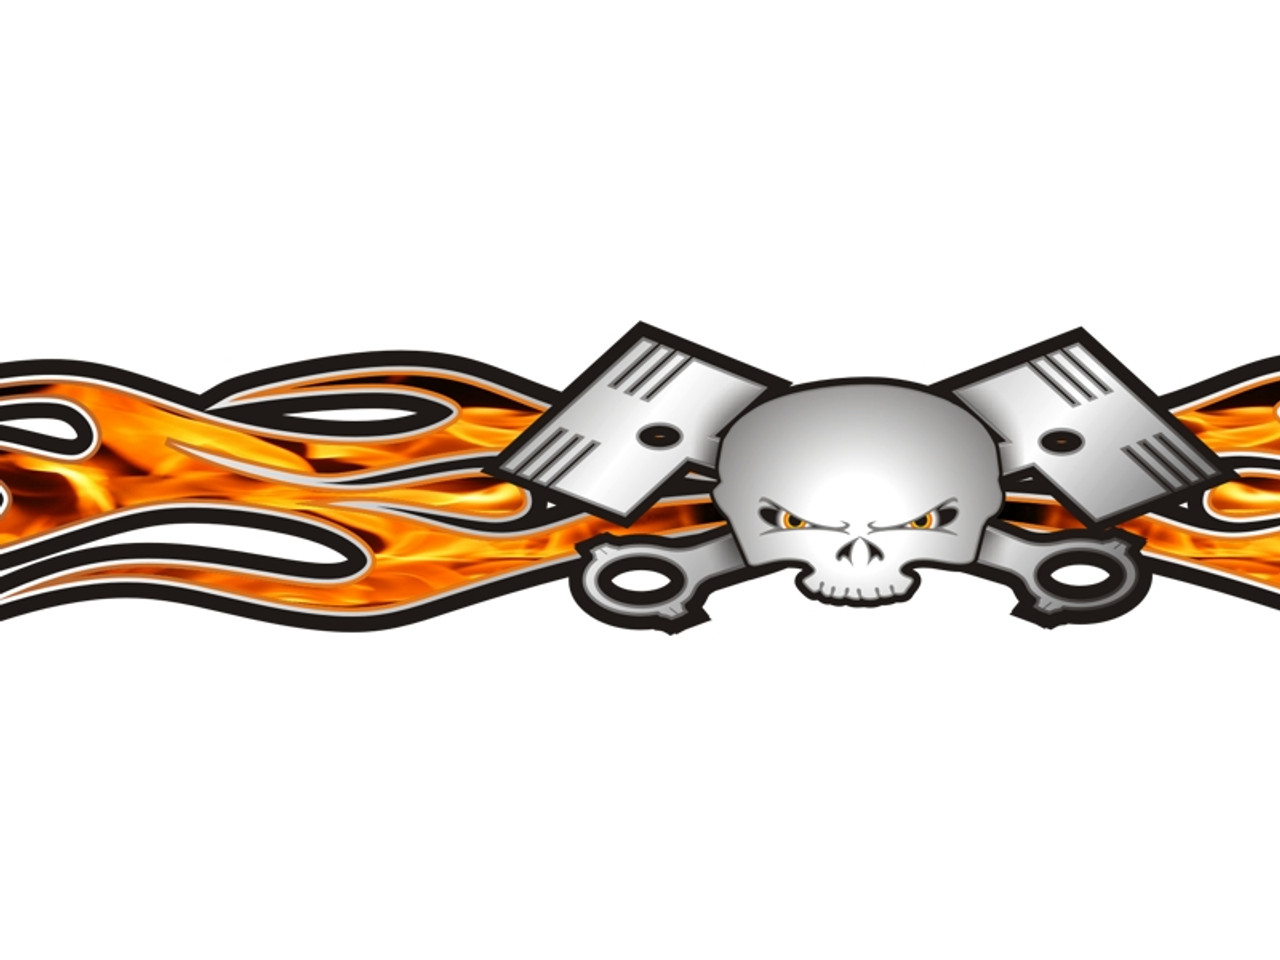 Windshield banner decal in true fire for hotrod cars and trucks